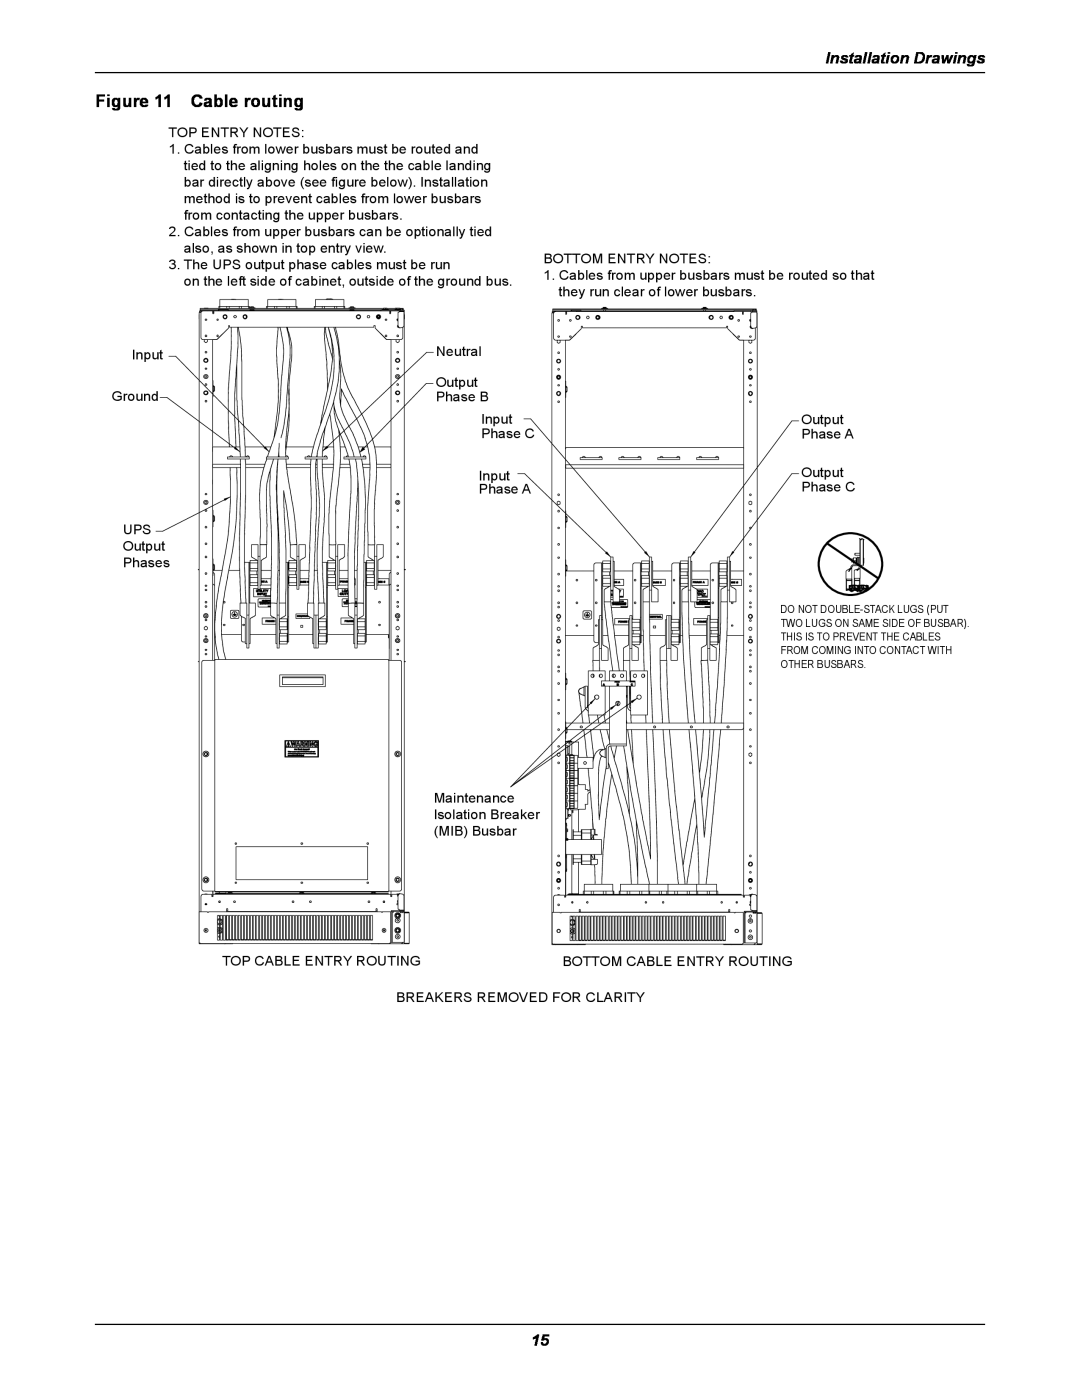 Emerson UPS Systems installation manual Cable routing, Installation Drawings 